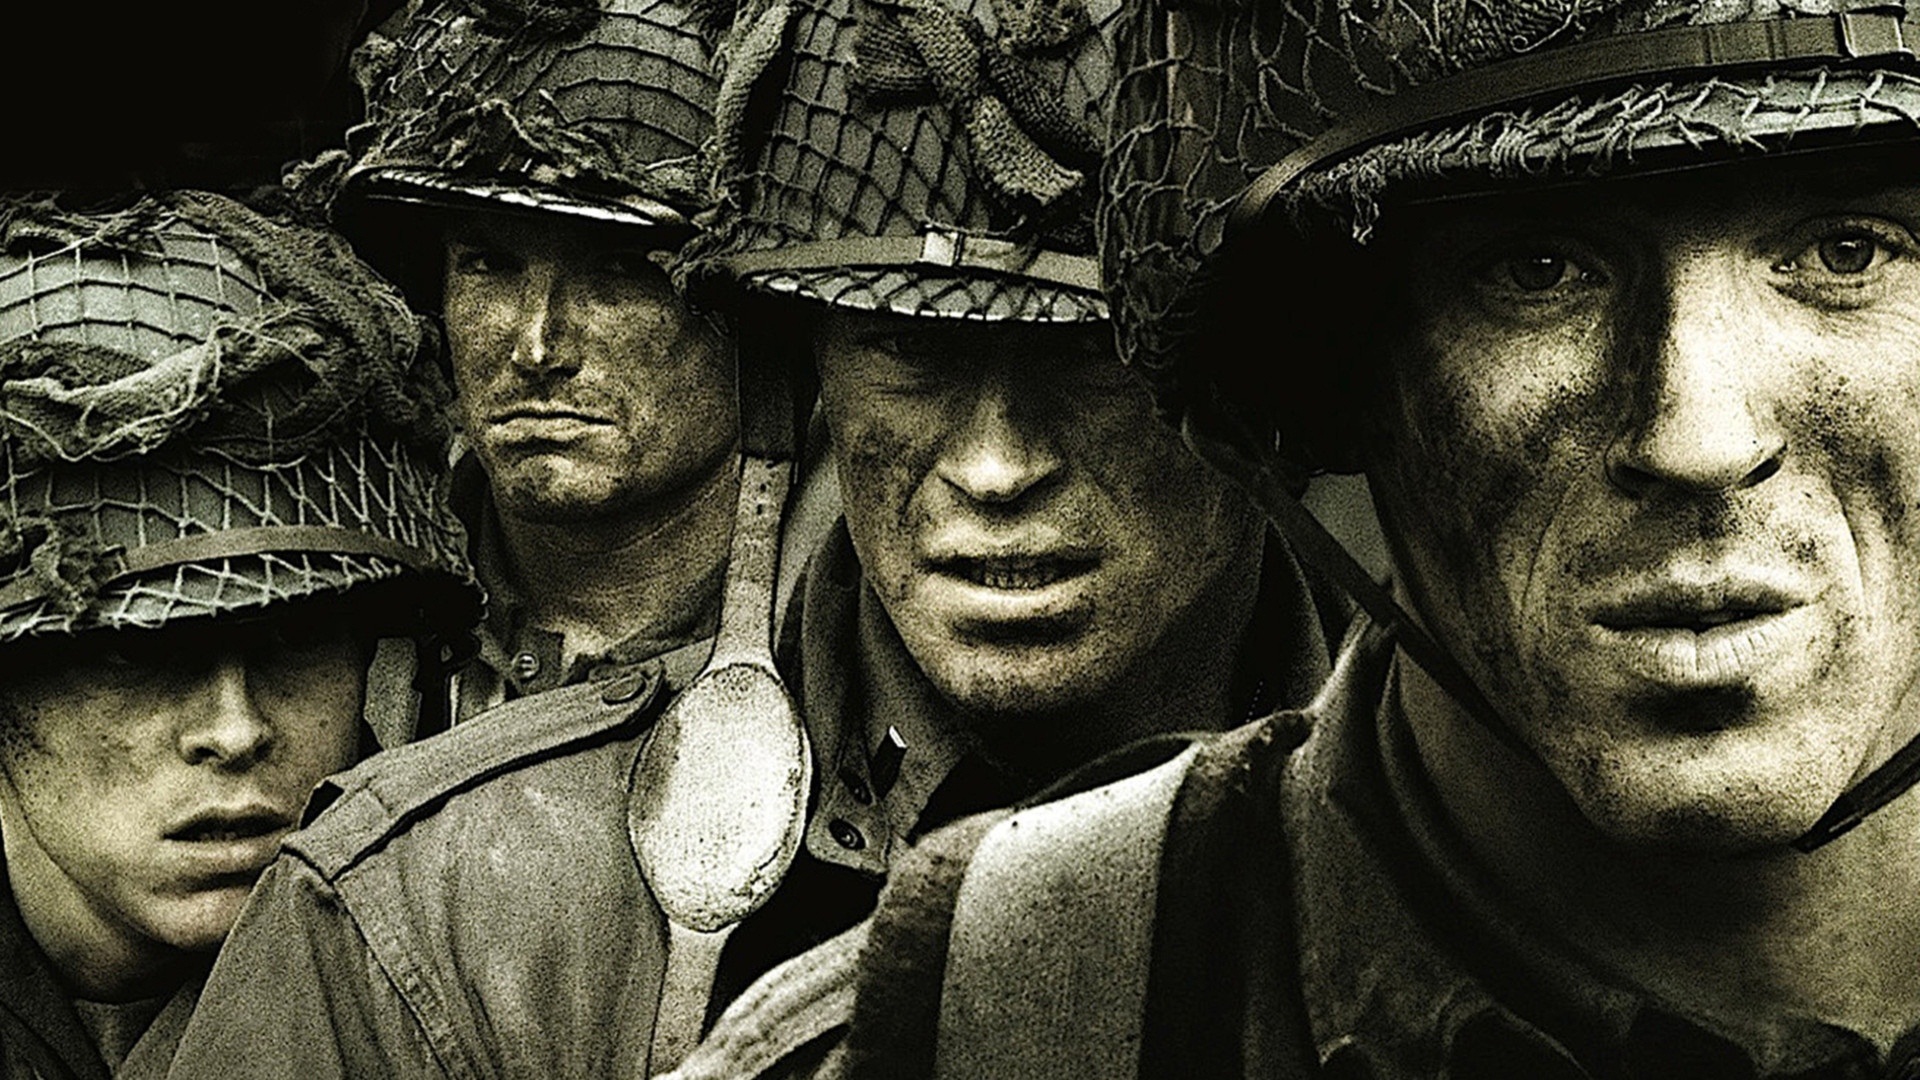 band of brothers wallpaper,people,human,adaptation,black and white,soldier